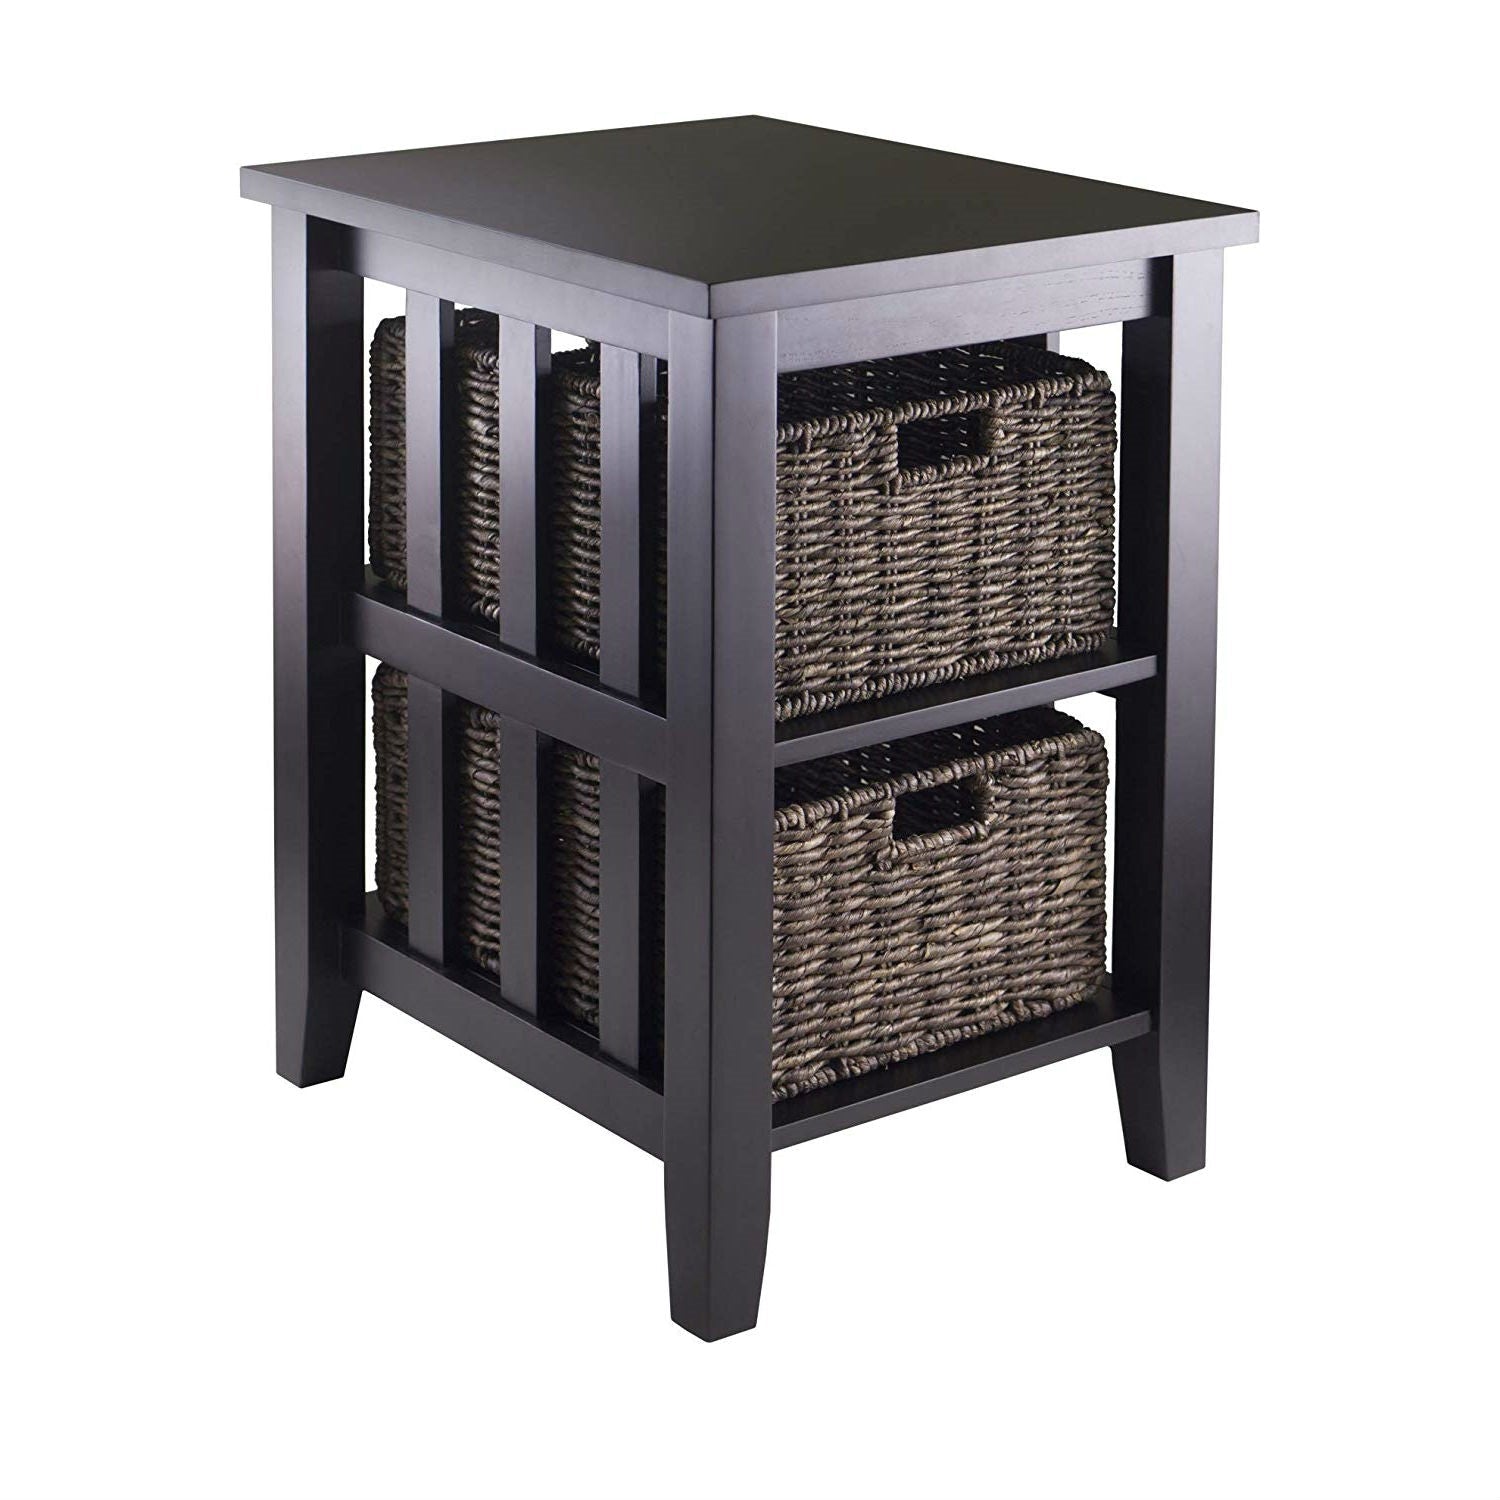 Living Room > Bookcases - Espresso 3 Tier Bookcase Shelf Accent Table With 2 Small Storage Baskets